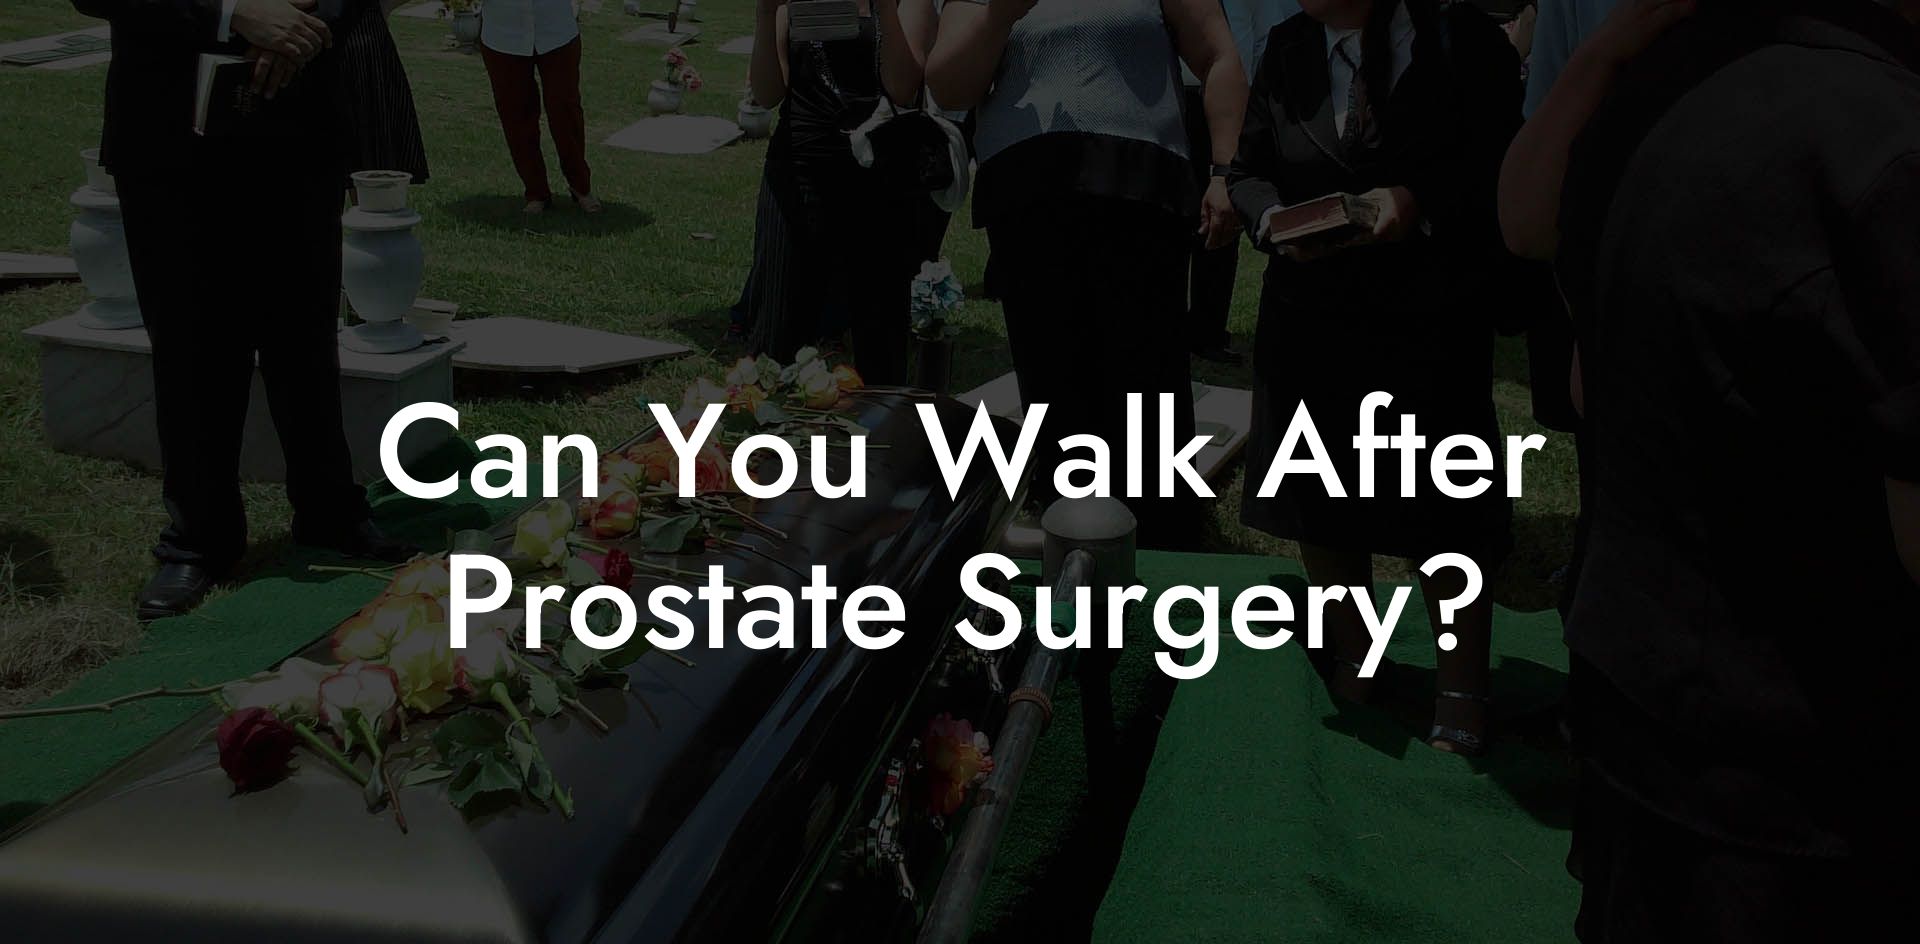 Can You Walk After Prostate Surgery?